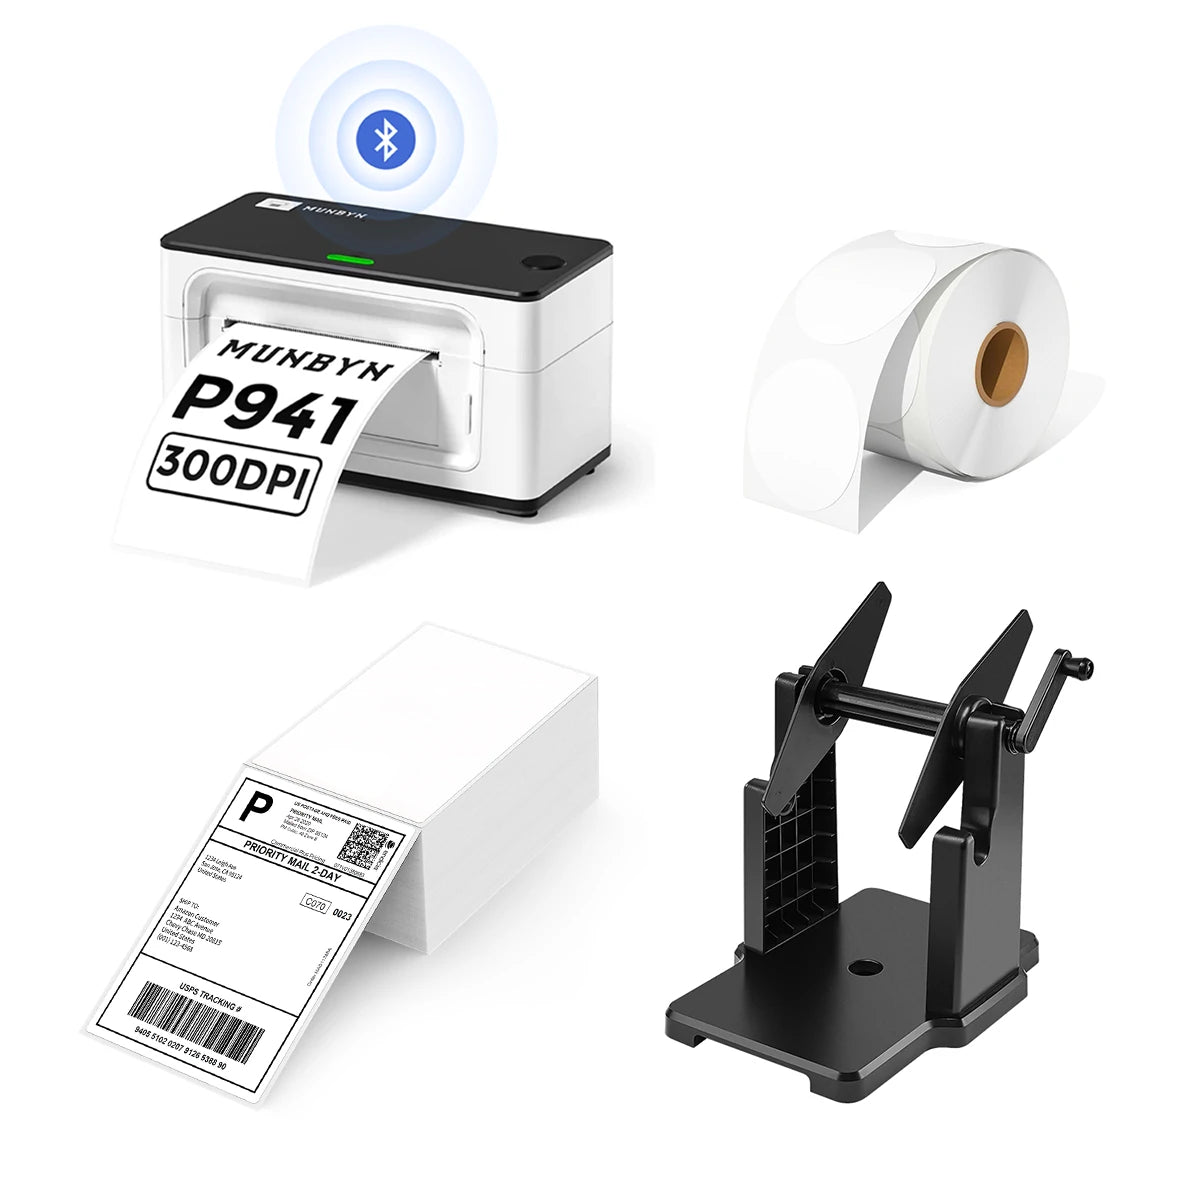 MUNBYN P941B Bluetooth Thermal Label Printer Kit includes a Bluetooth label printer, a label roll holder, a roll of circle labels, and a stack of shipping labels.